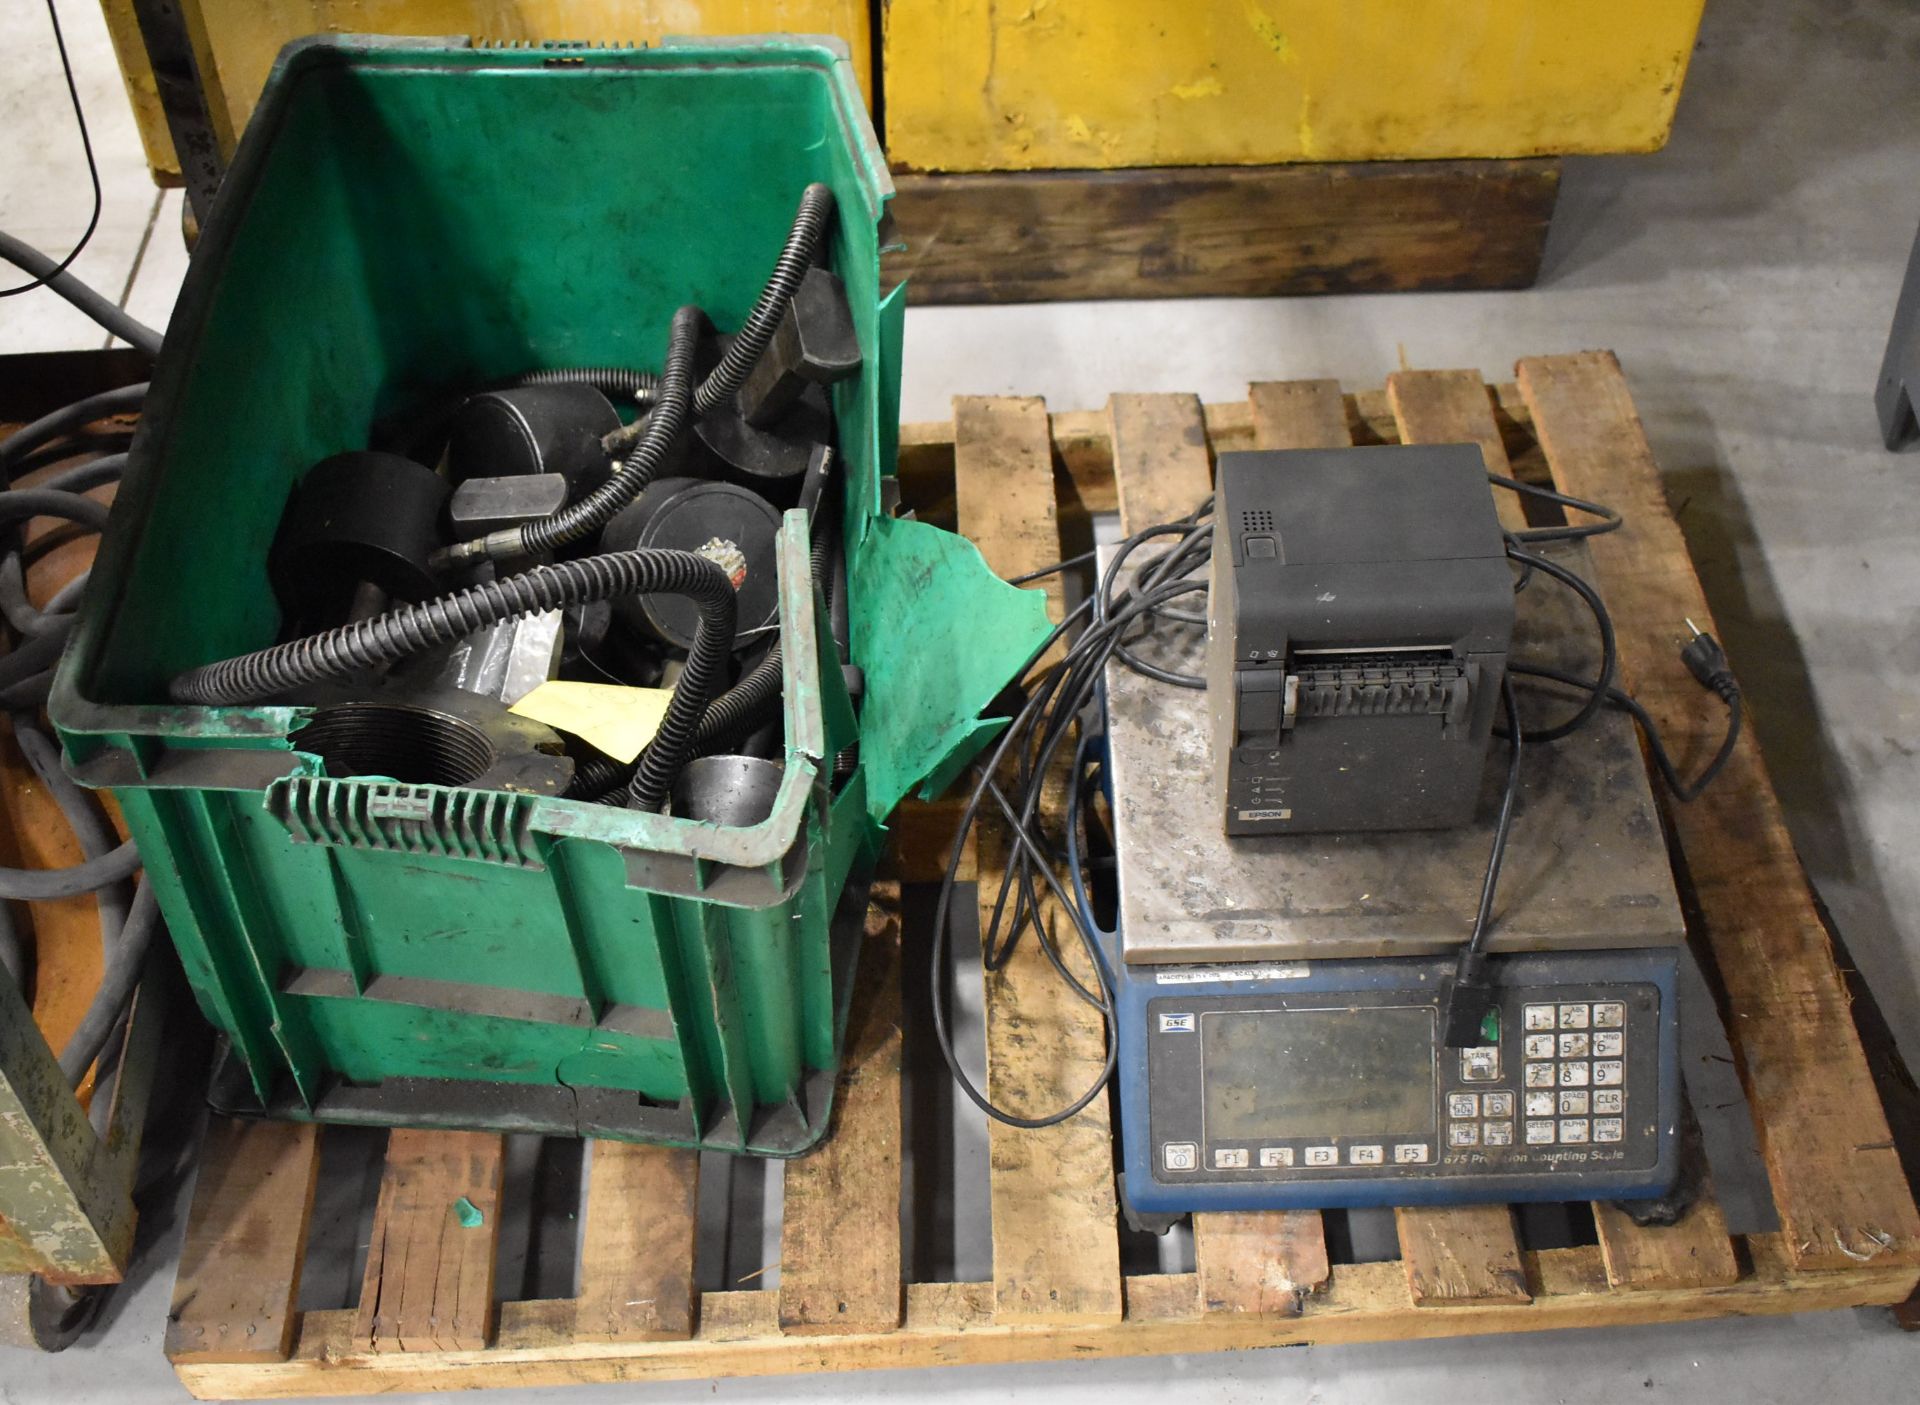 LOT/ CART WITH 15 KVA TRANSFORMER, SPARE PARTS, BENCH-TYPE SCALE WITH PRINTER - Image 4 of 5